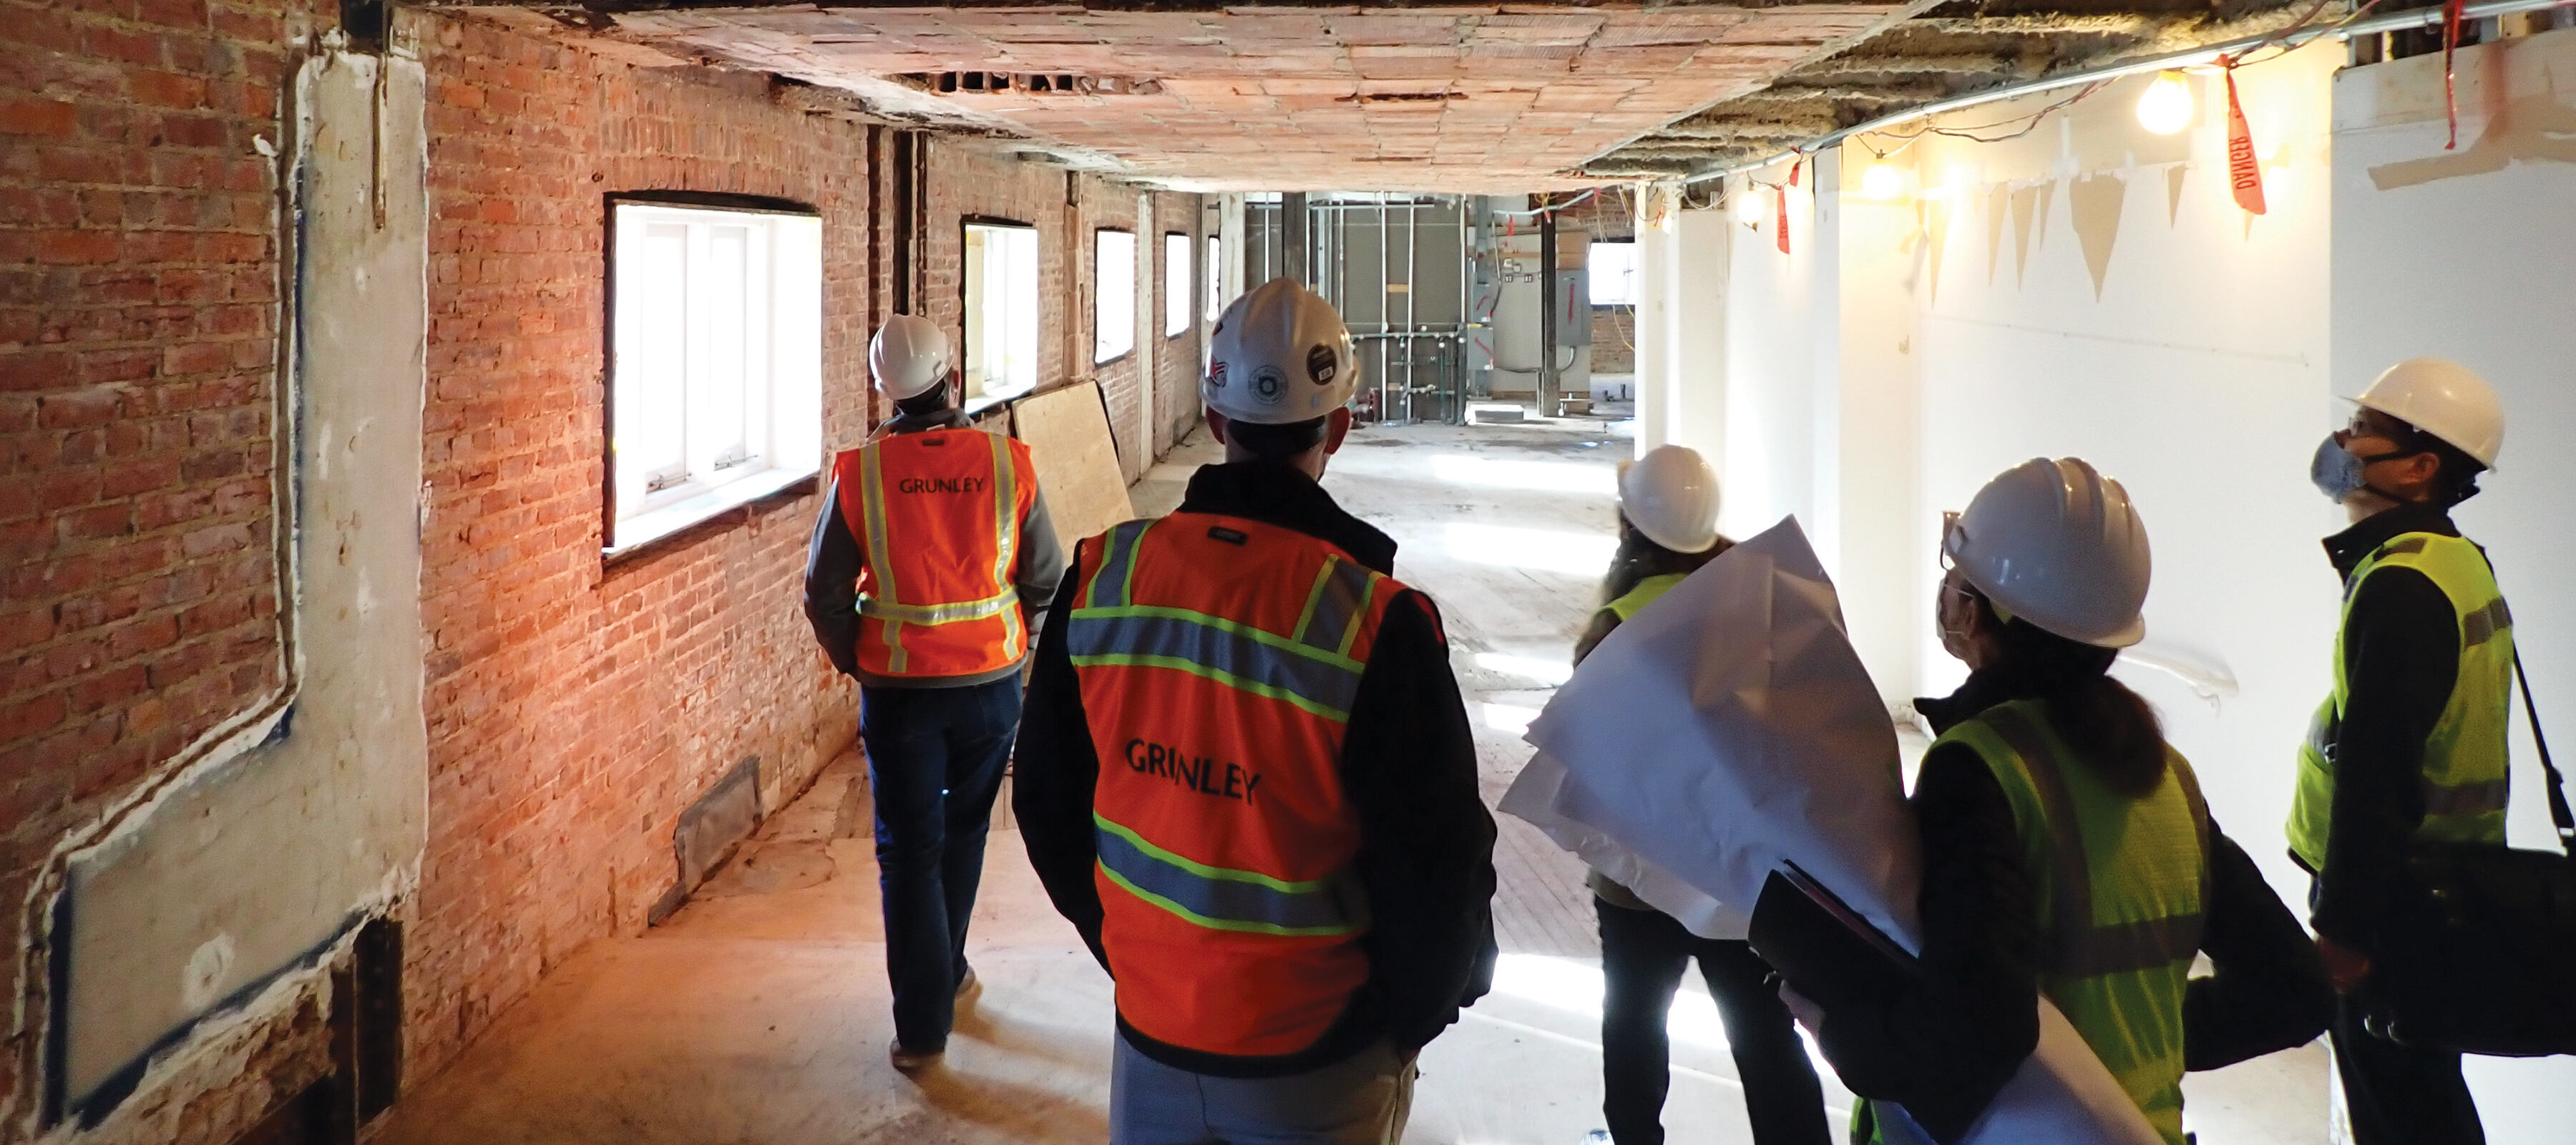 A team of five construction workers stand in the hallway of the museum building as it is under renovation. They wear white hard hats and yellow and orange safety vests over business casual clothes. They look up and down the hall, which is stripped down to it's base layer of red brick, concrete, and thick beams.